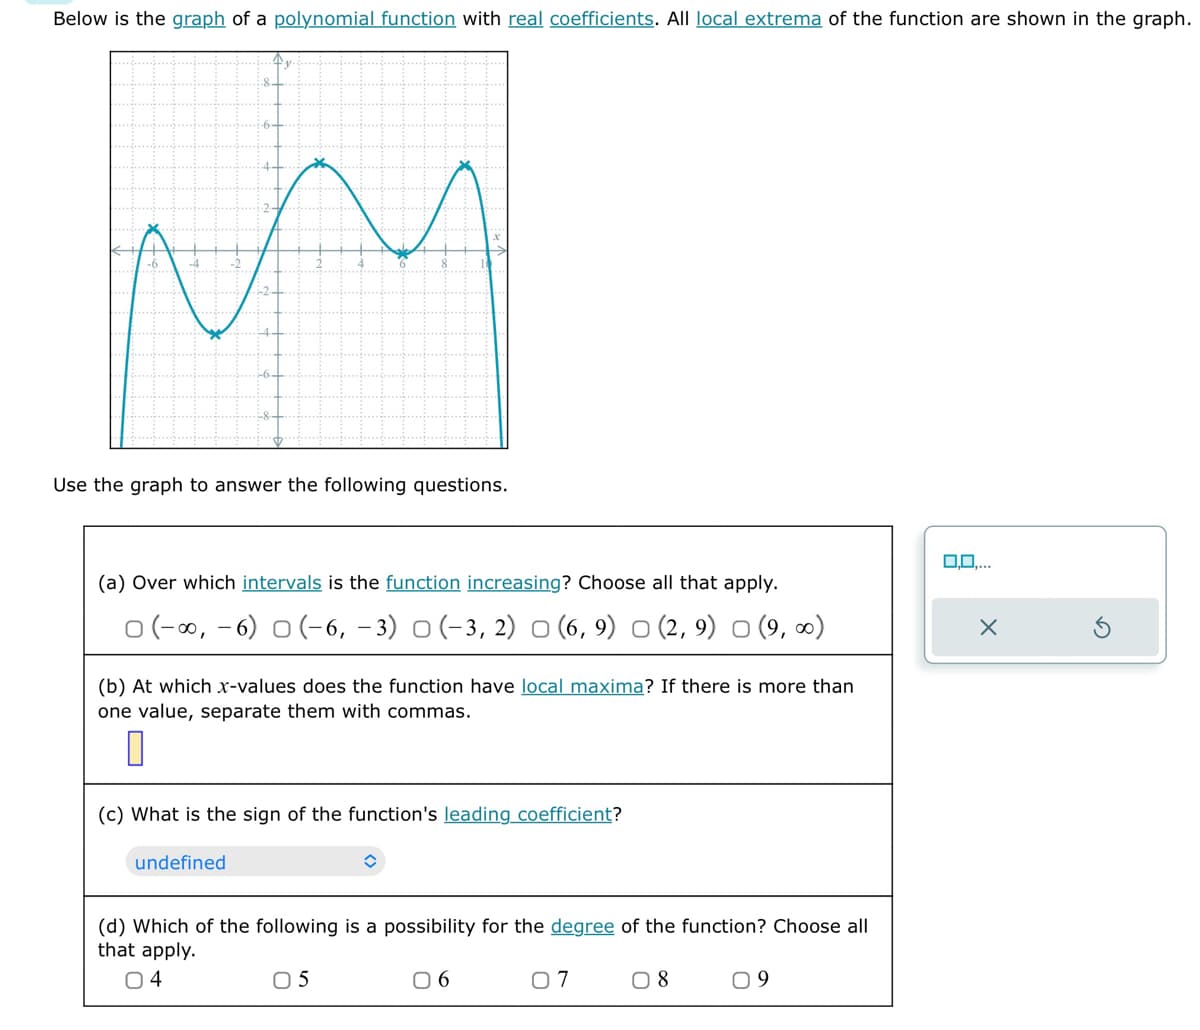 Below is the graph of a polynomial function with real coefficients. All local extrema of the function are shown in the graph.
Fr
Use the graph to answer the following questions.
(a) Over which intervals is the function increasing? Choose all that apply.
(-, -6) (-6, -3) (-3, 2) ○ (6,9) ○ (2, 9) (9,∞)
(b) At which x-values does the function have local maxima? If there is more than
one value, separate them with commas.
(c) What is the sign of the function's leading coefficient?
undefined
=
(d) Which of the following is a possibility for the degree of the function? Choose all
that apply.
04
05
06
07
☐ 8
09
0.0,...
✗